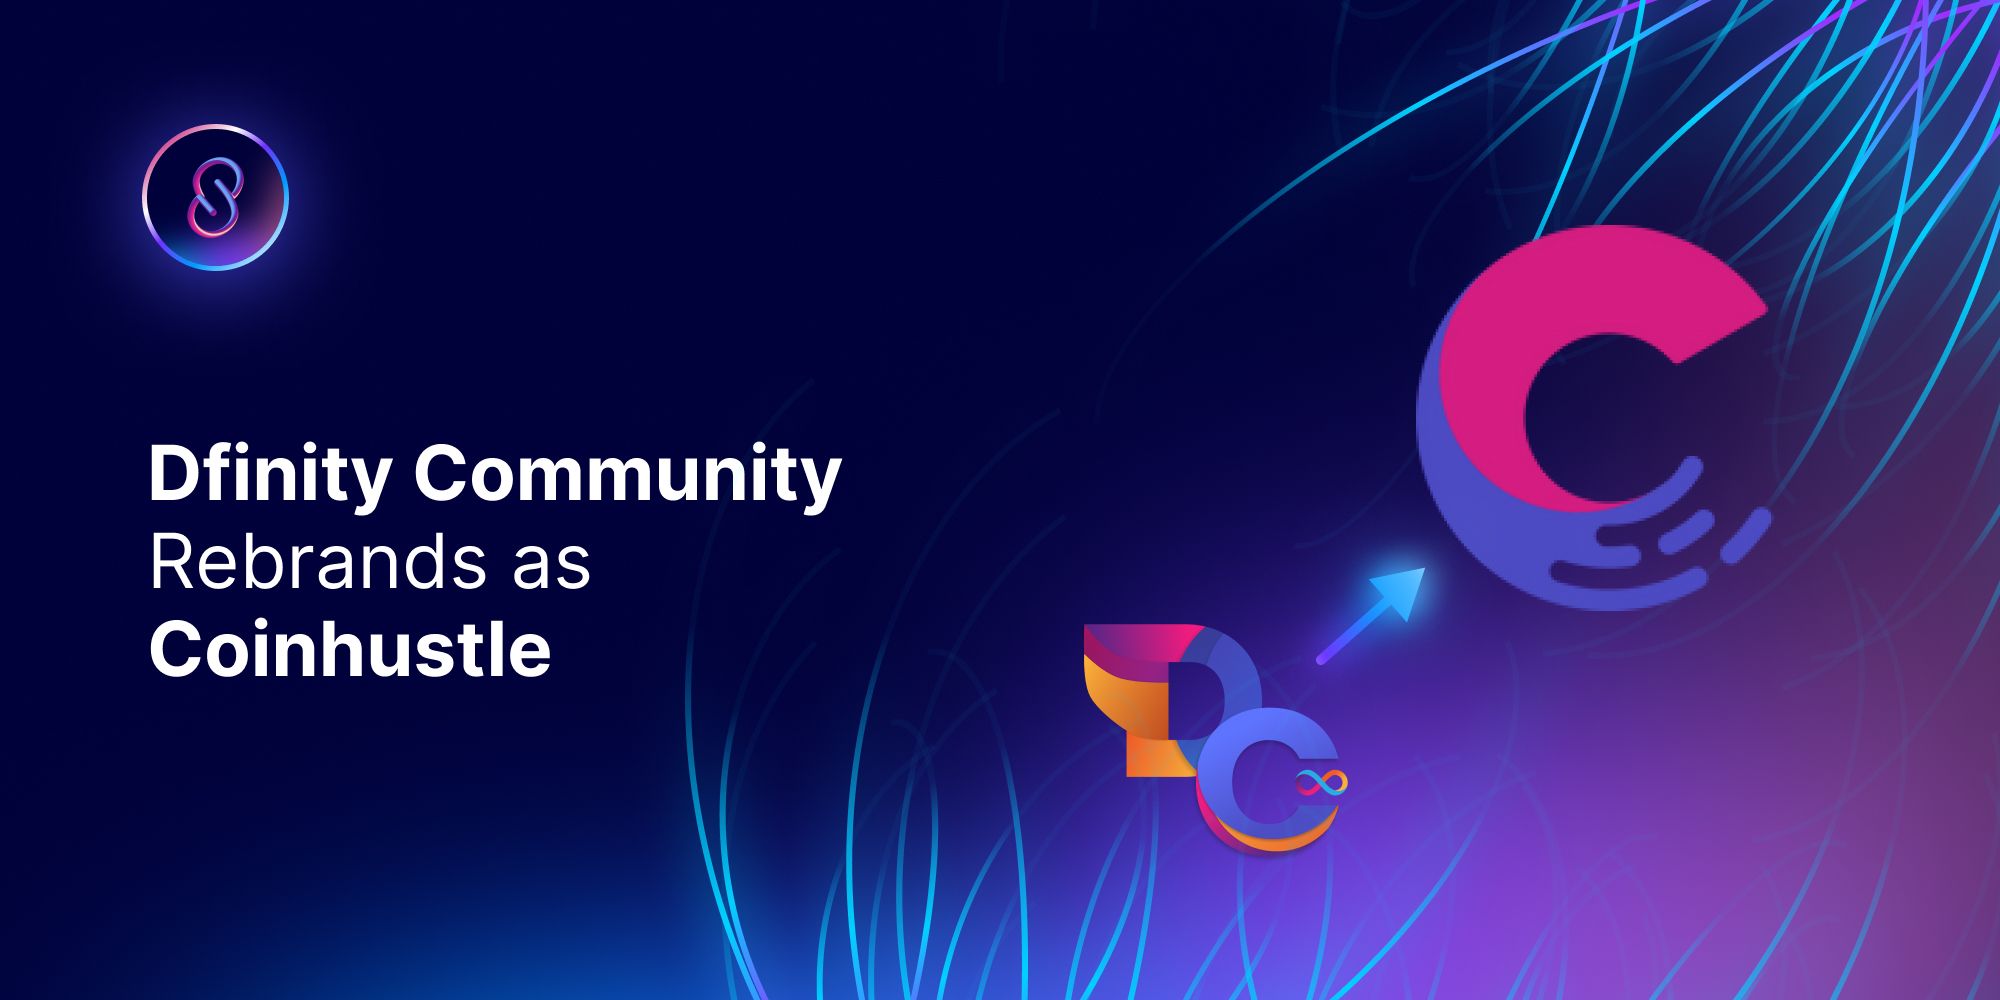 Dfinity Community Rebrands as Coinhustle